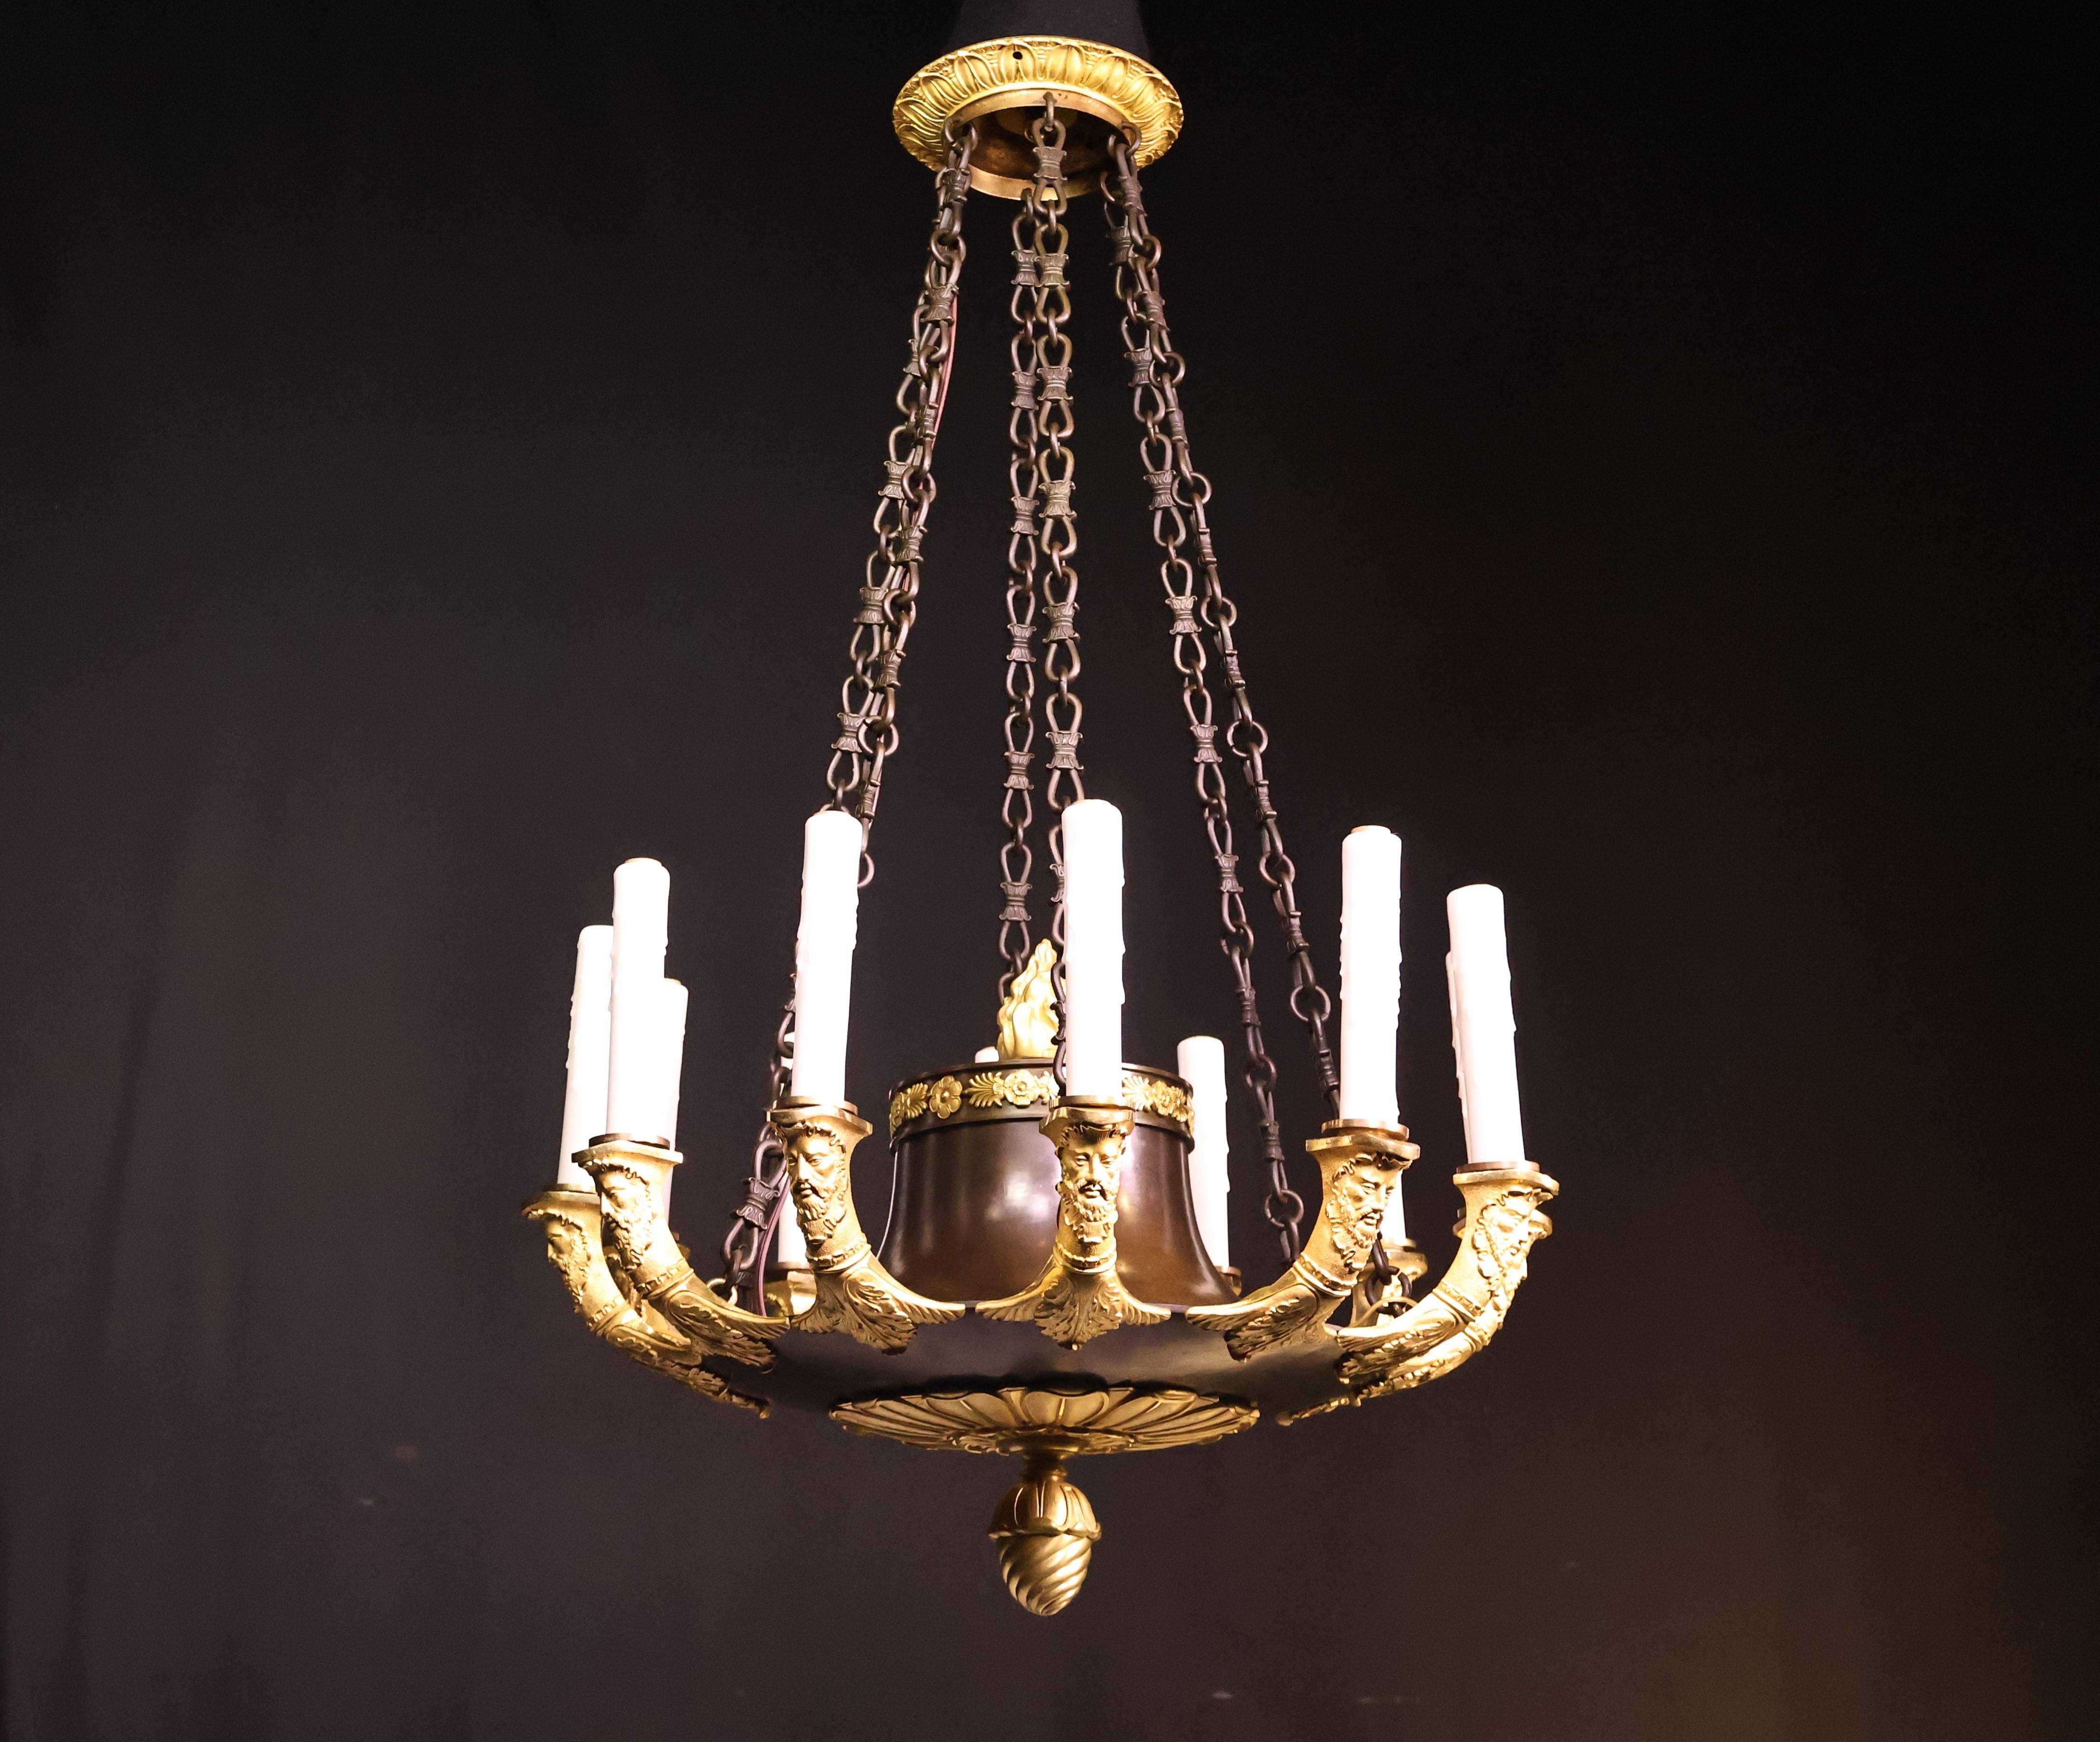 A Superb Charles X Chandelier, totally original, never electrified. Original gilt & patinated bronze. Exquisite detail. France, circa 1825. 
Dimensions: Height 42